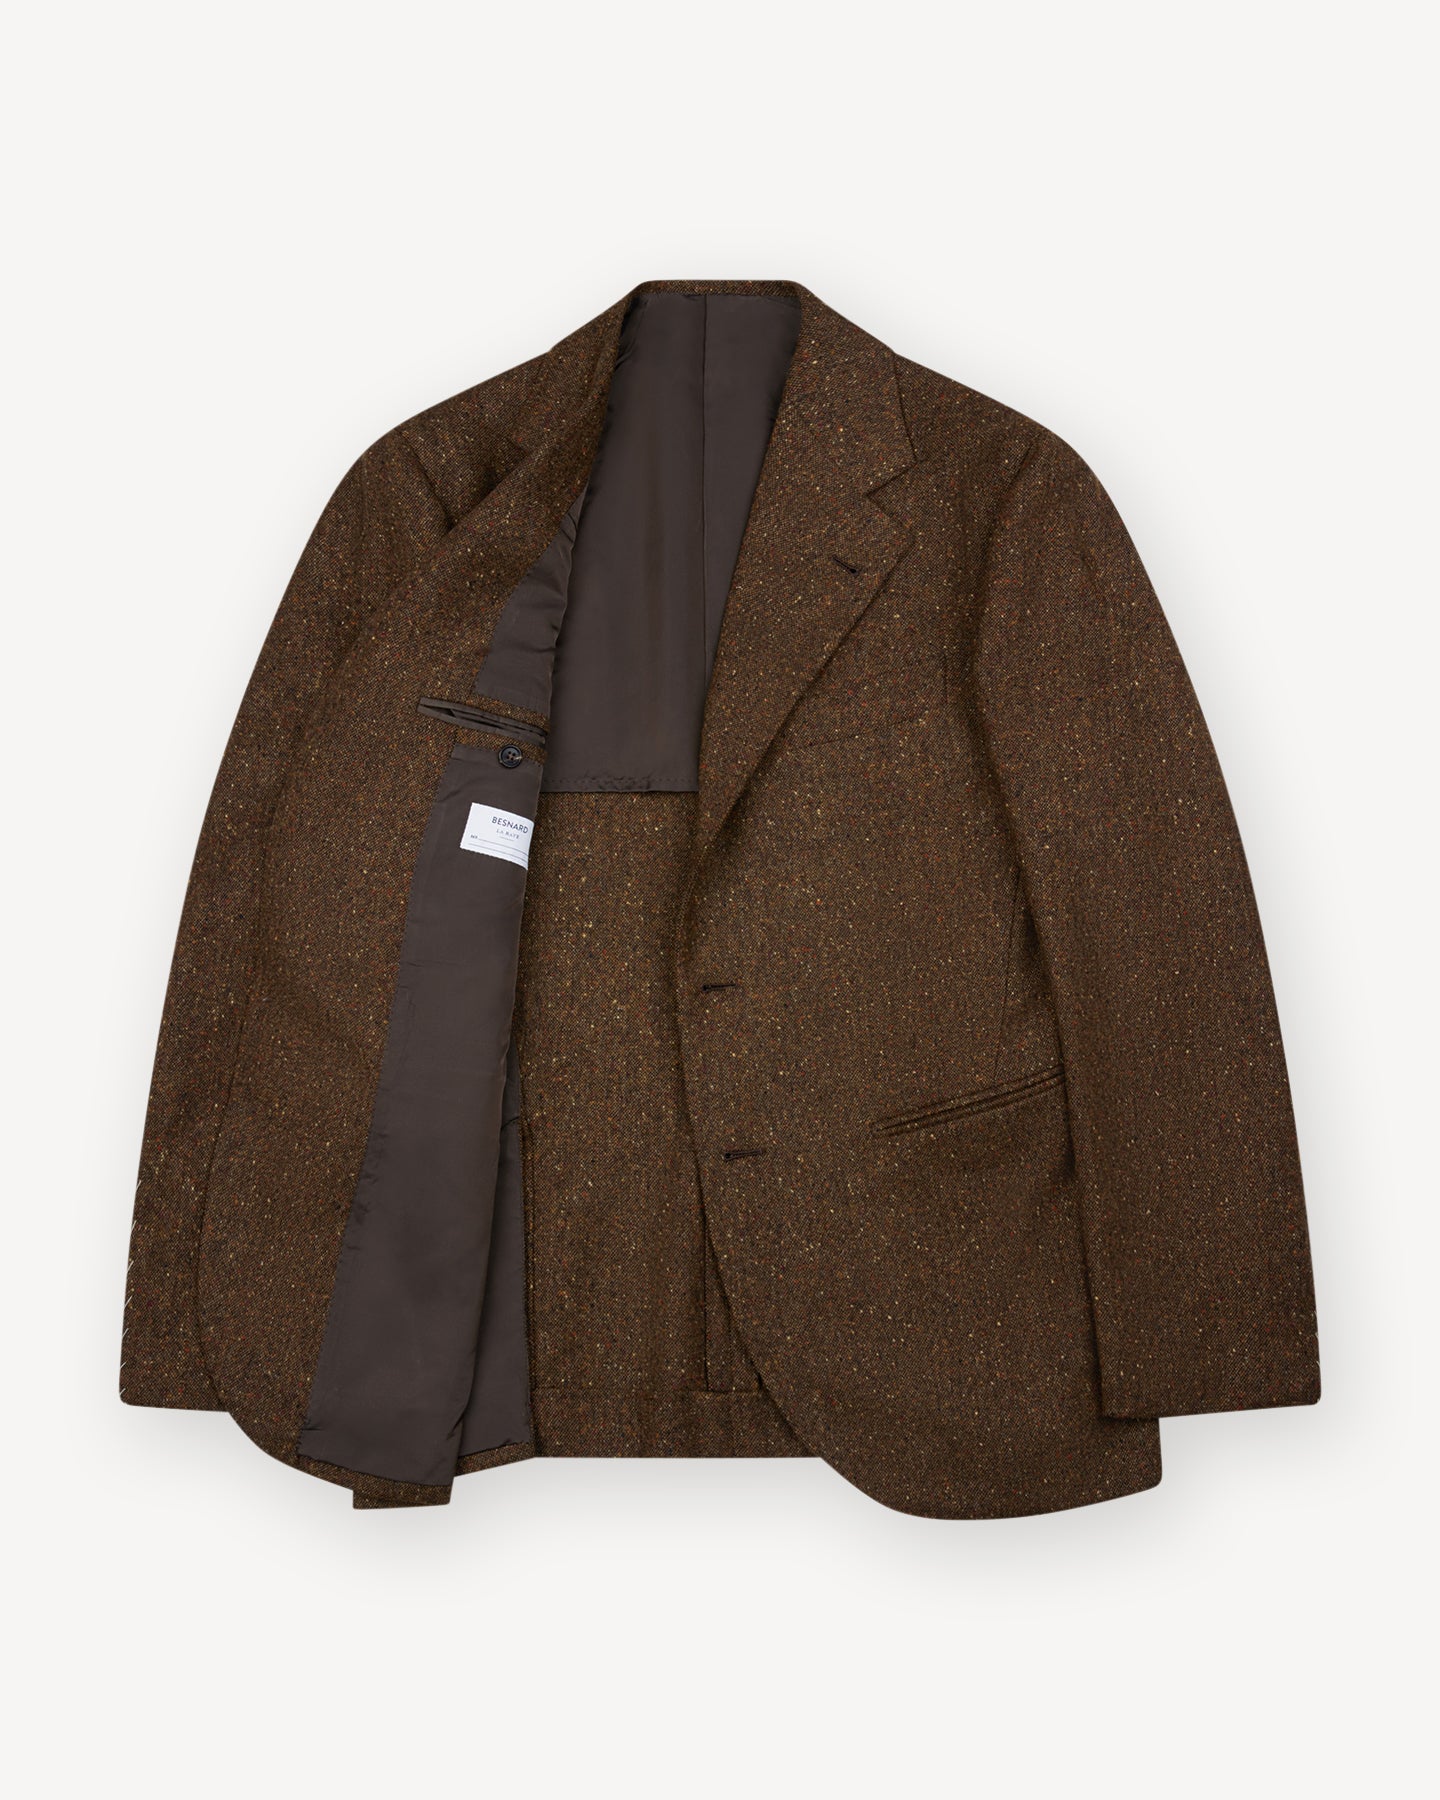 Made-To-Order Sport Coat Brown Donegal Tweed